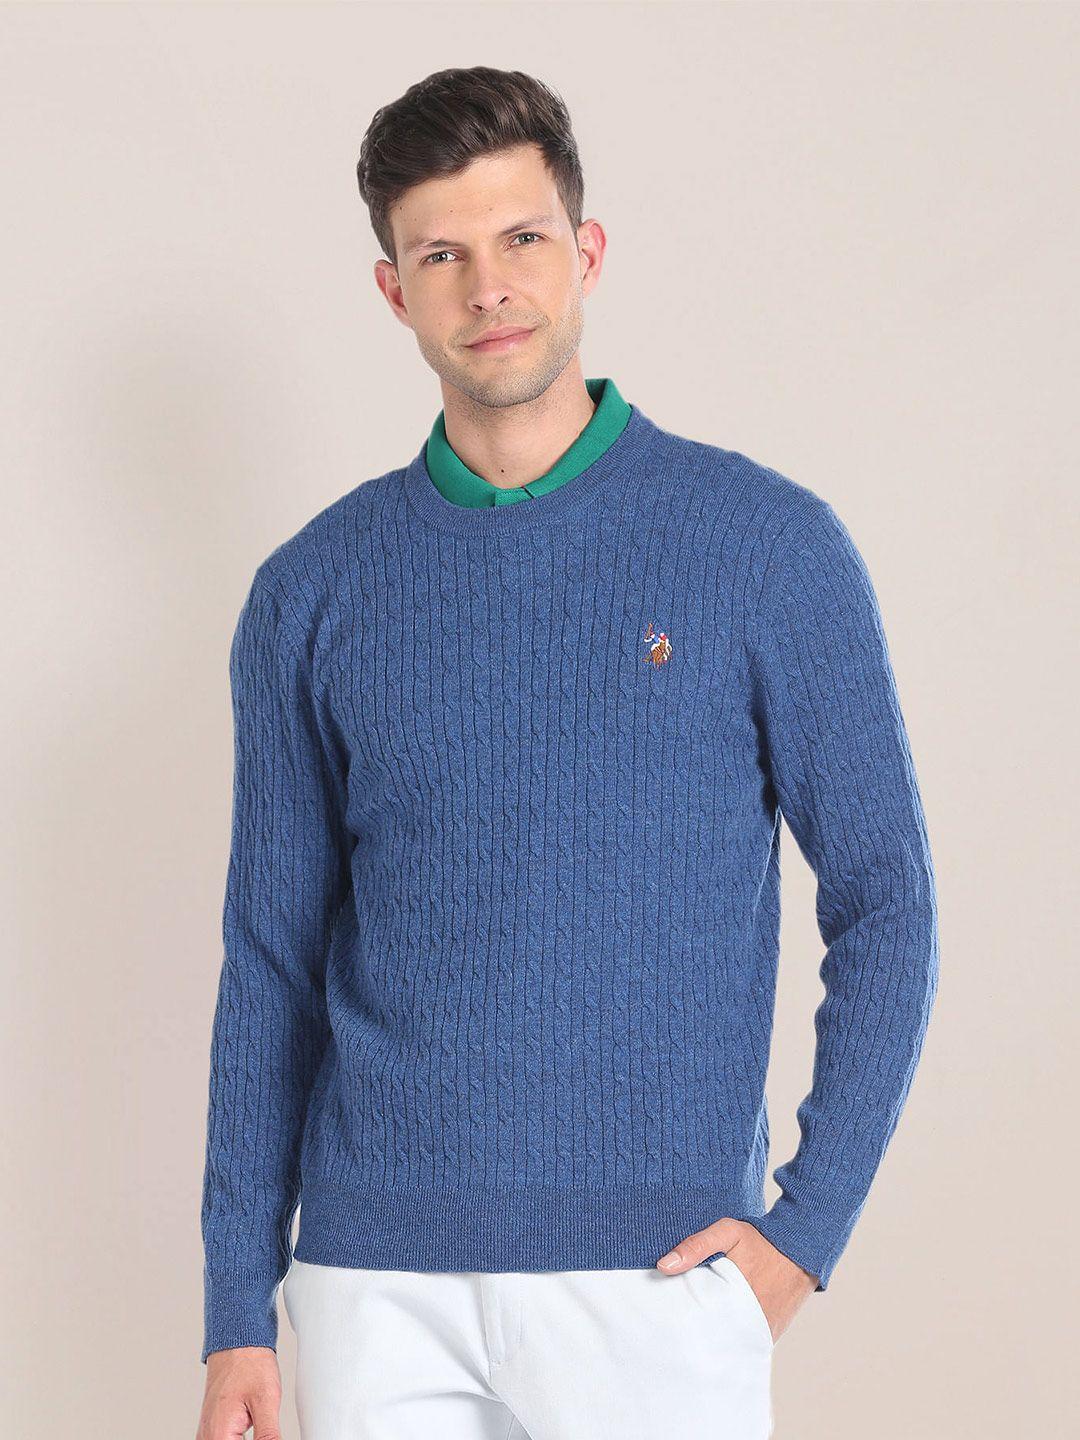 u.s. polo assn. cable knit self design round neck pullover sweater